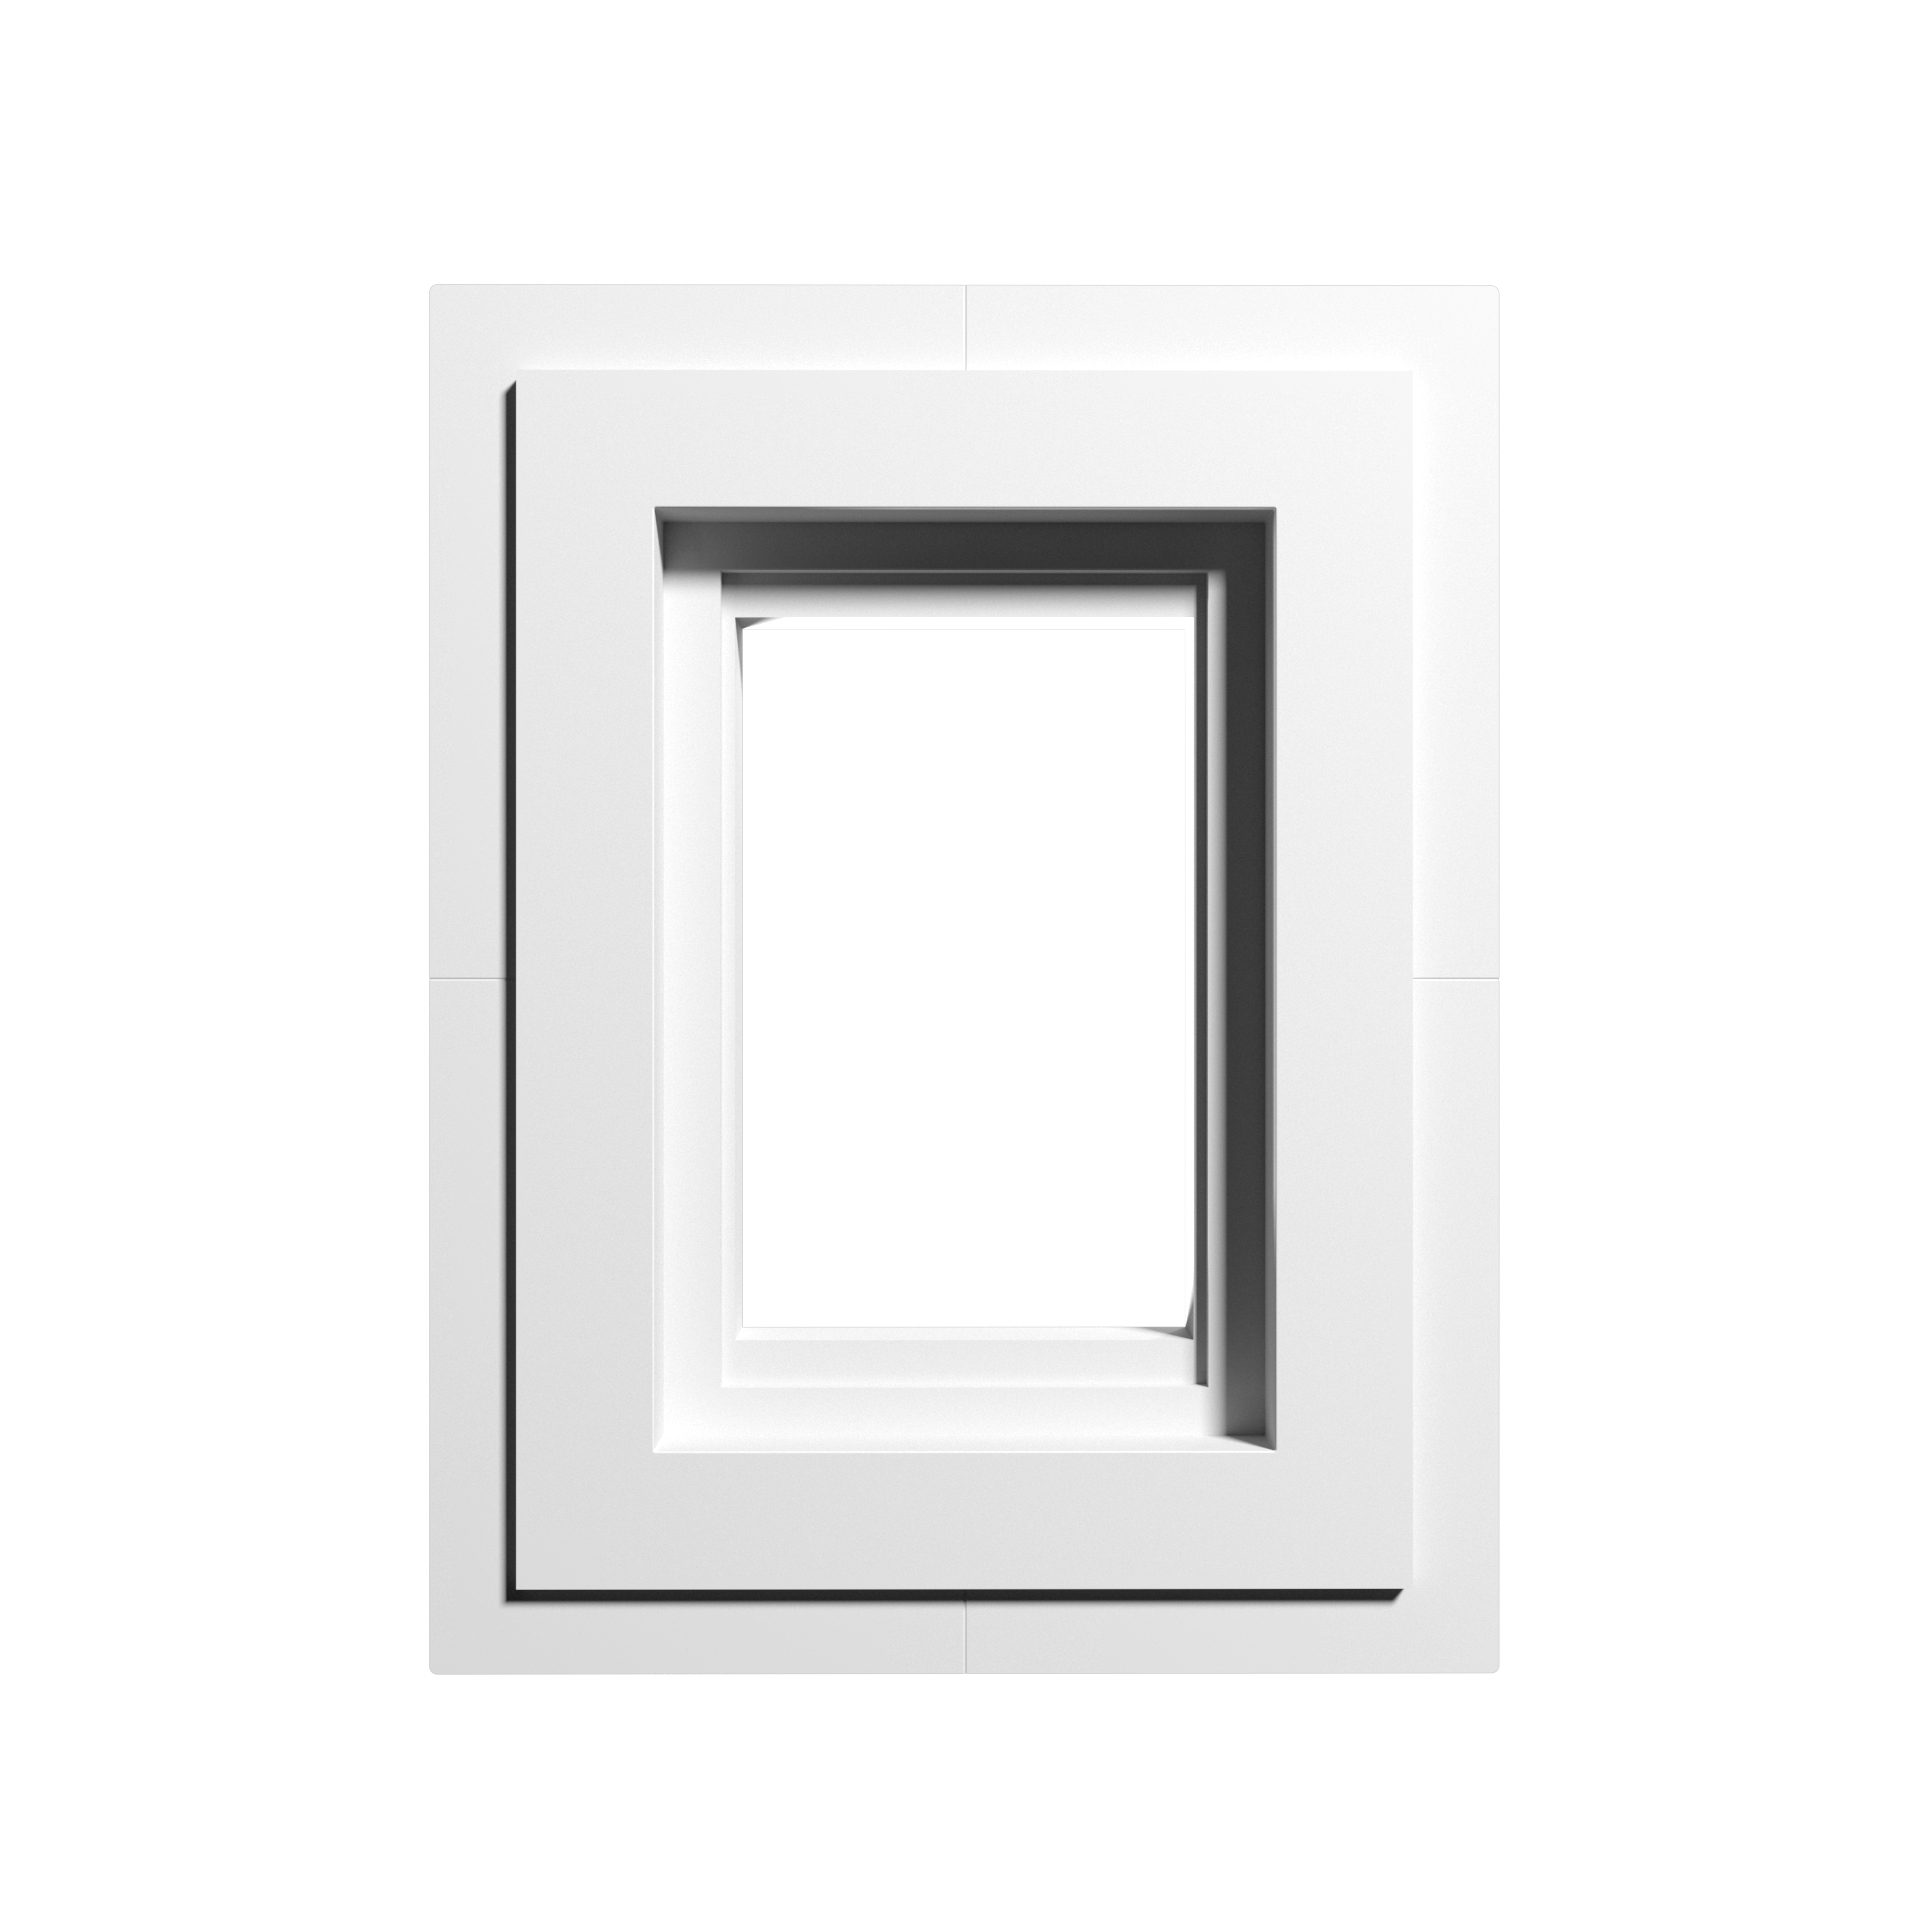 SLA-1GRHZ-062 One Gang Creston Horizon Architectural Style Mount - Carlon (box/ring) not included | Flush In-Wall Mount